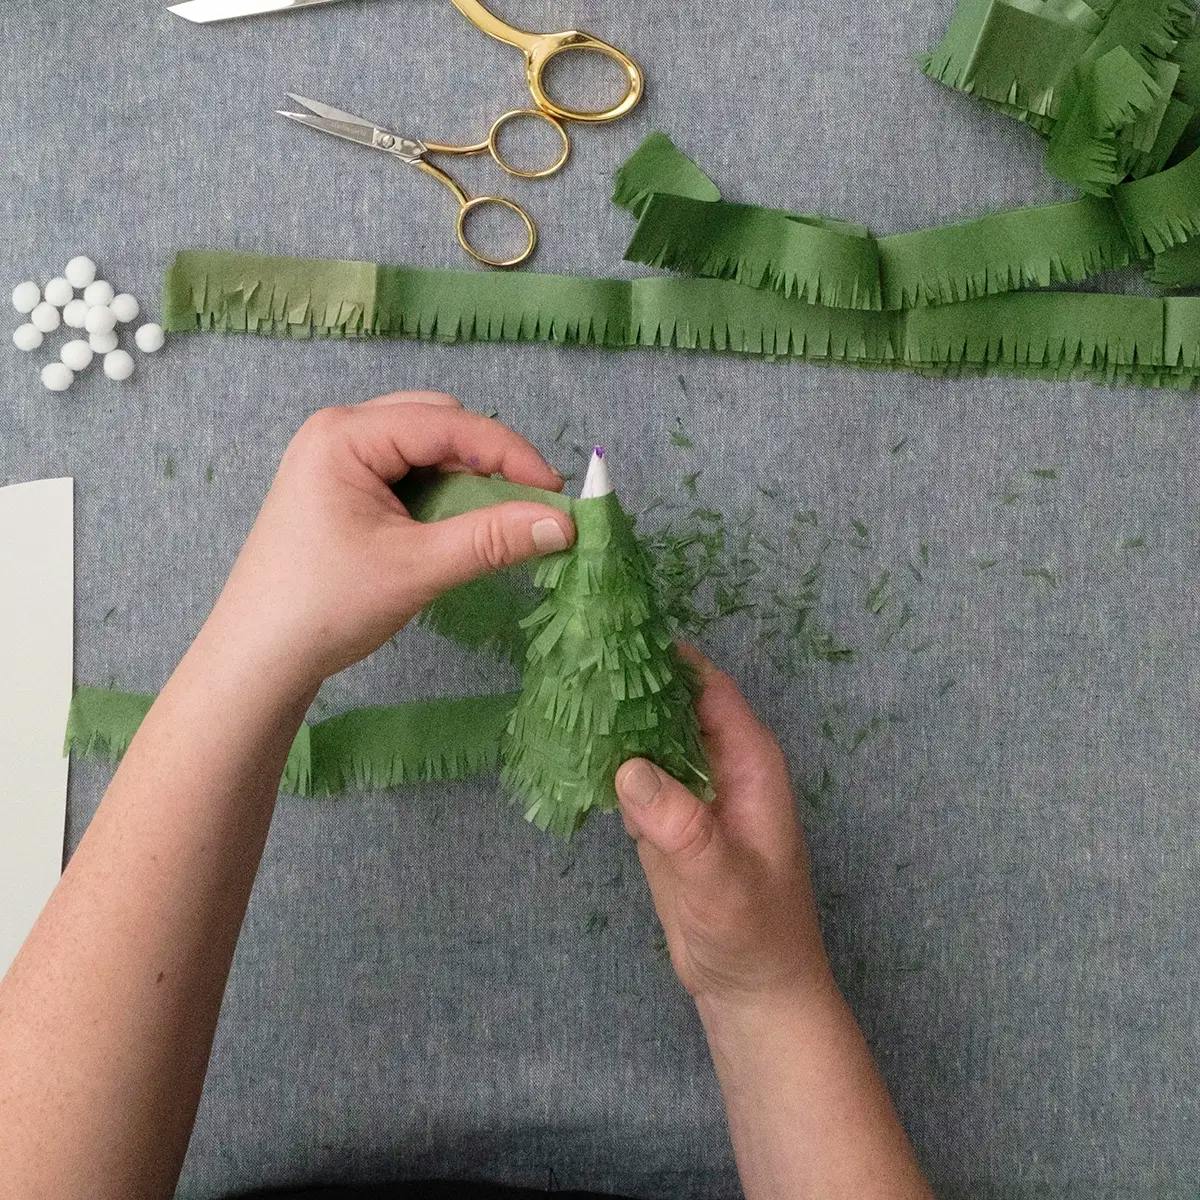 Glueing tissue paper to a cone as part of a paper tree decoration.